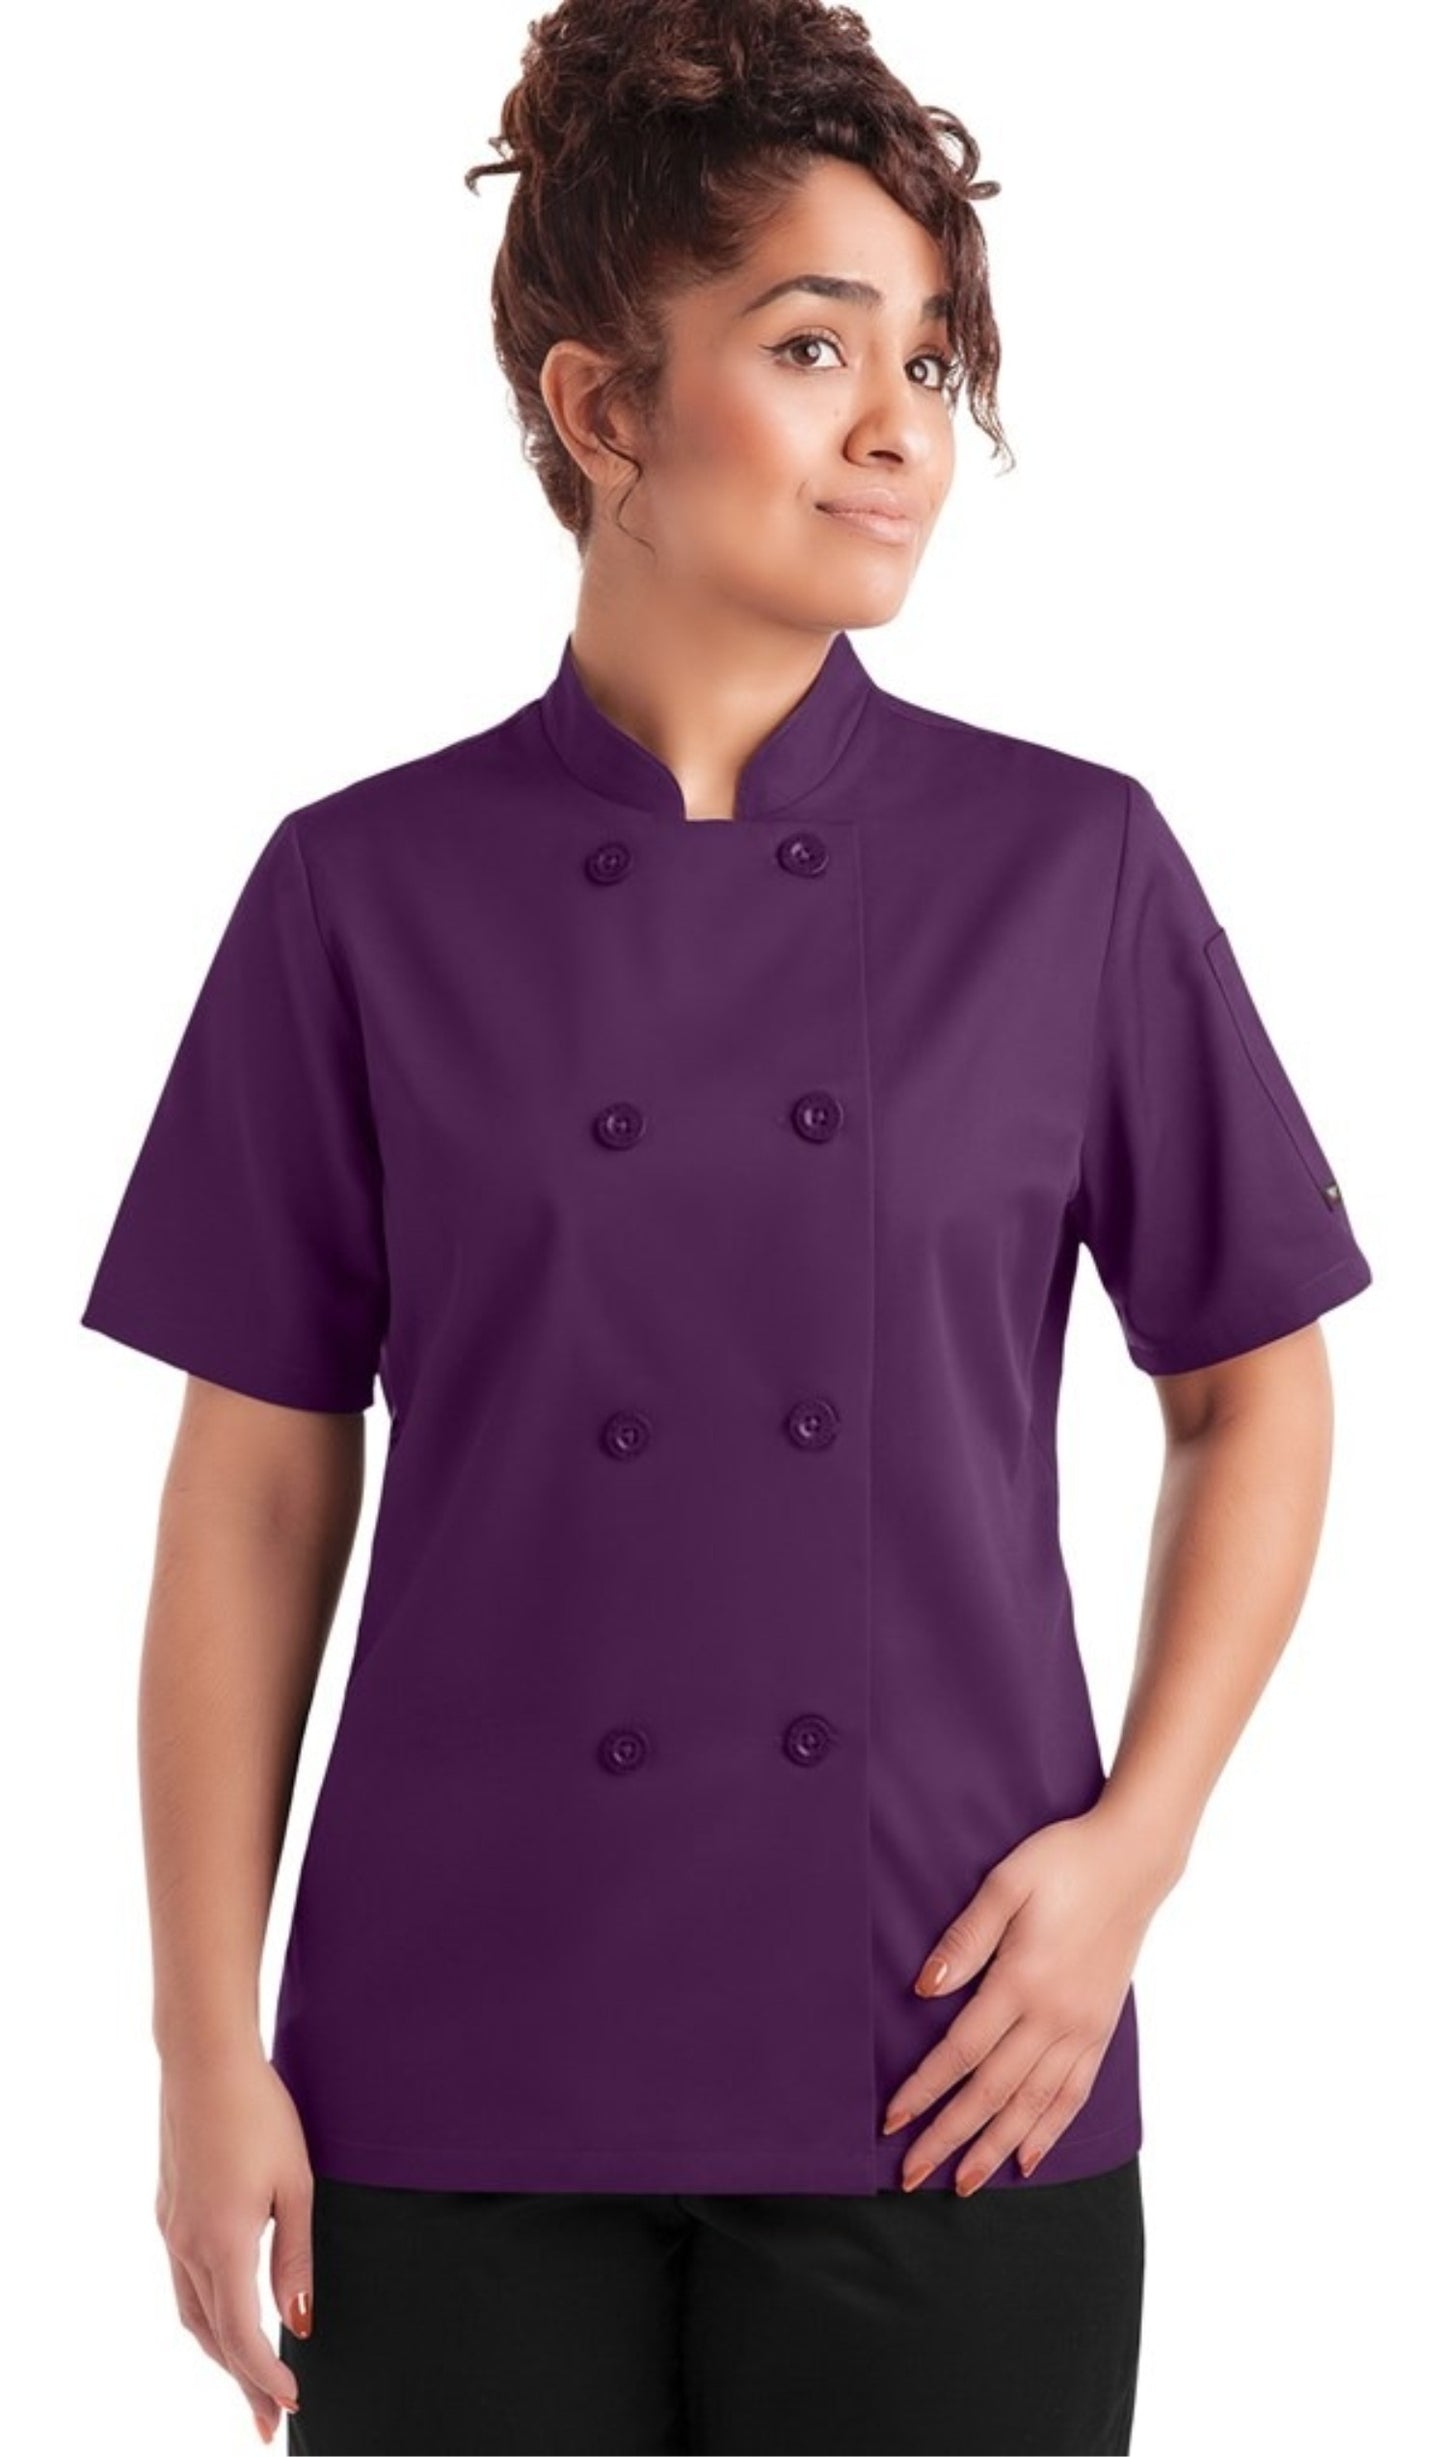 Female Chef Coat Executive Chef Wear White Double Breasted PRICE RS 300 PER PIECE MOQ 2